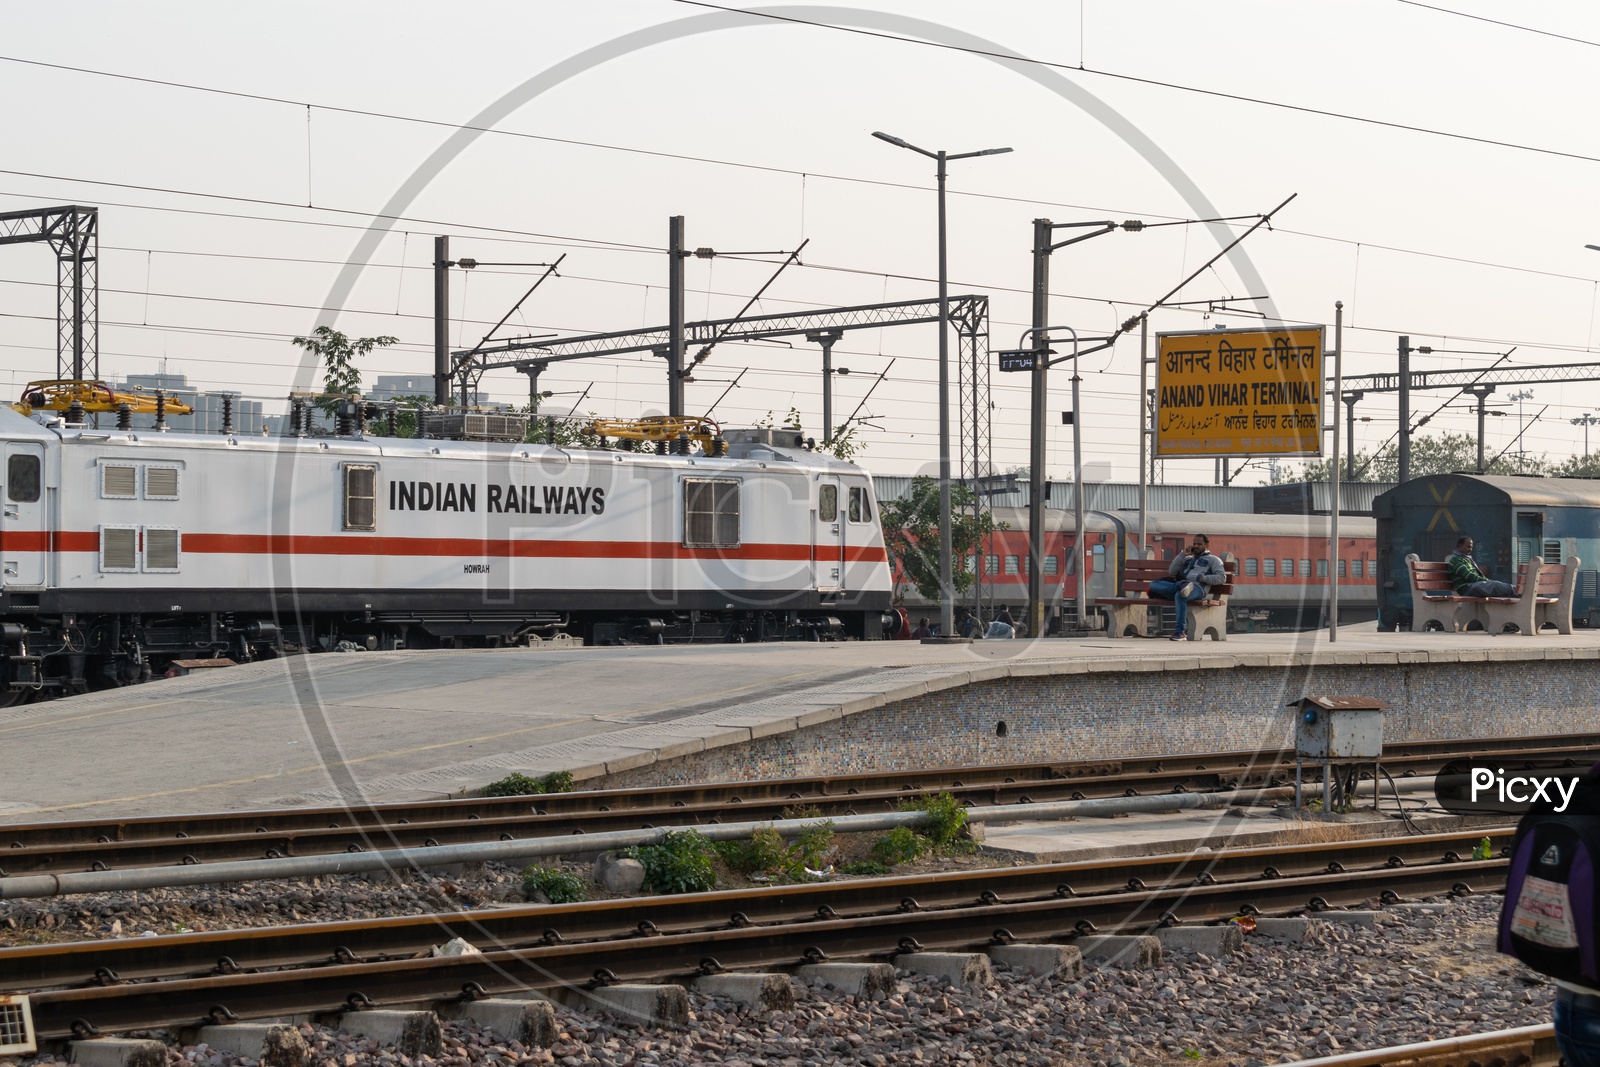 Indian Railway Engine and Railway Track at Anand Vihar Terminal railway station